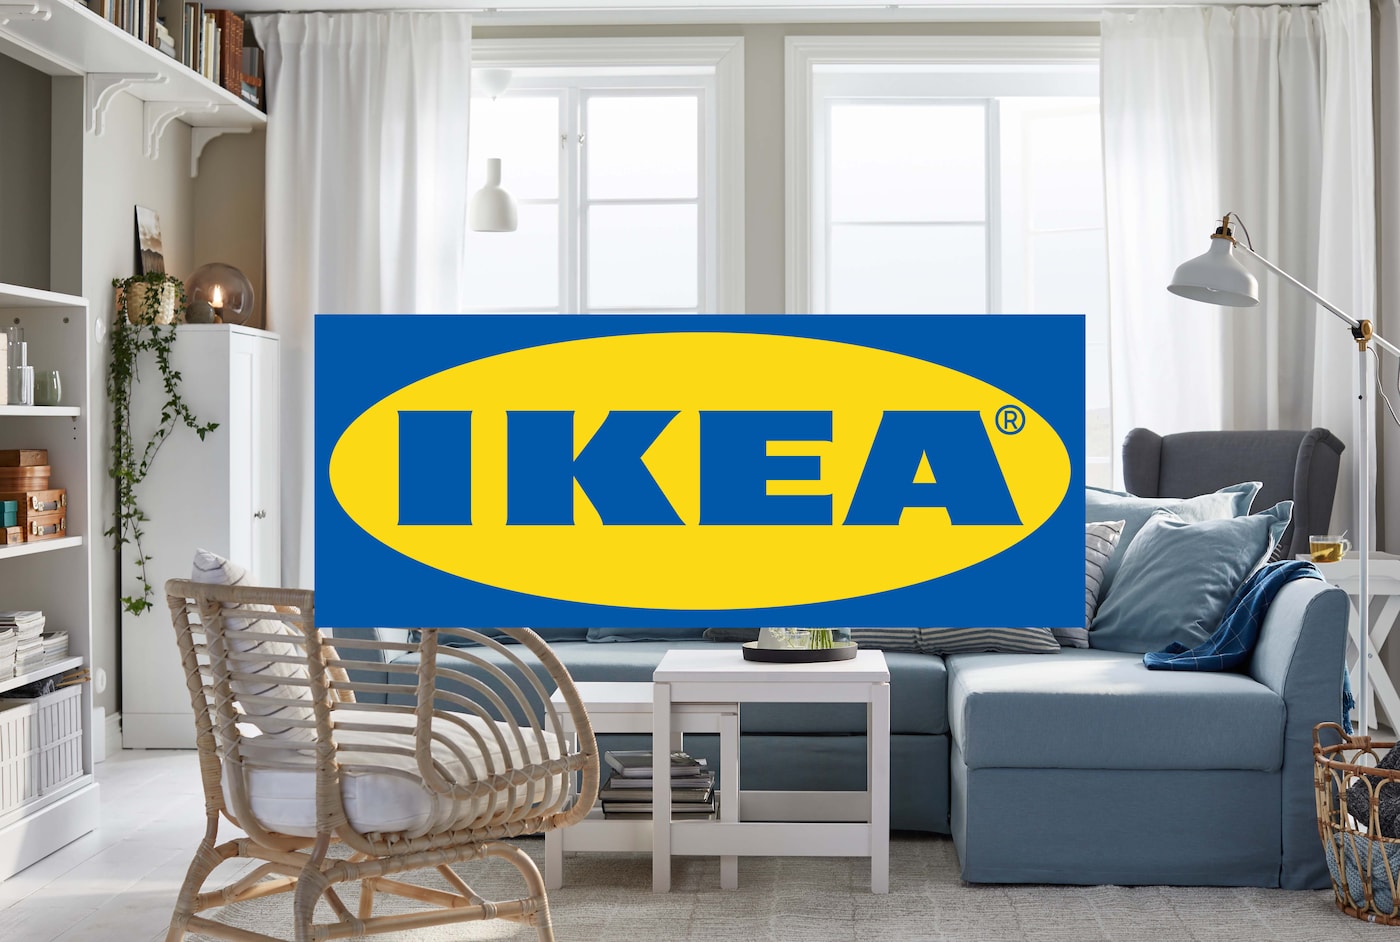 Ikea get $15, $30, $50 off purchase of $150, $300, $500 (before tax)